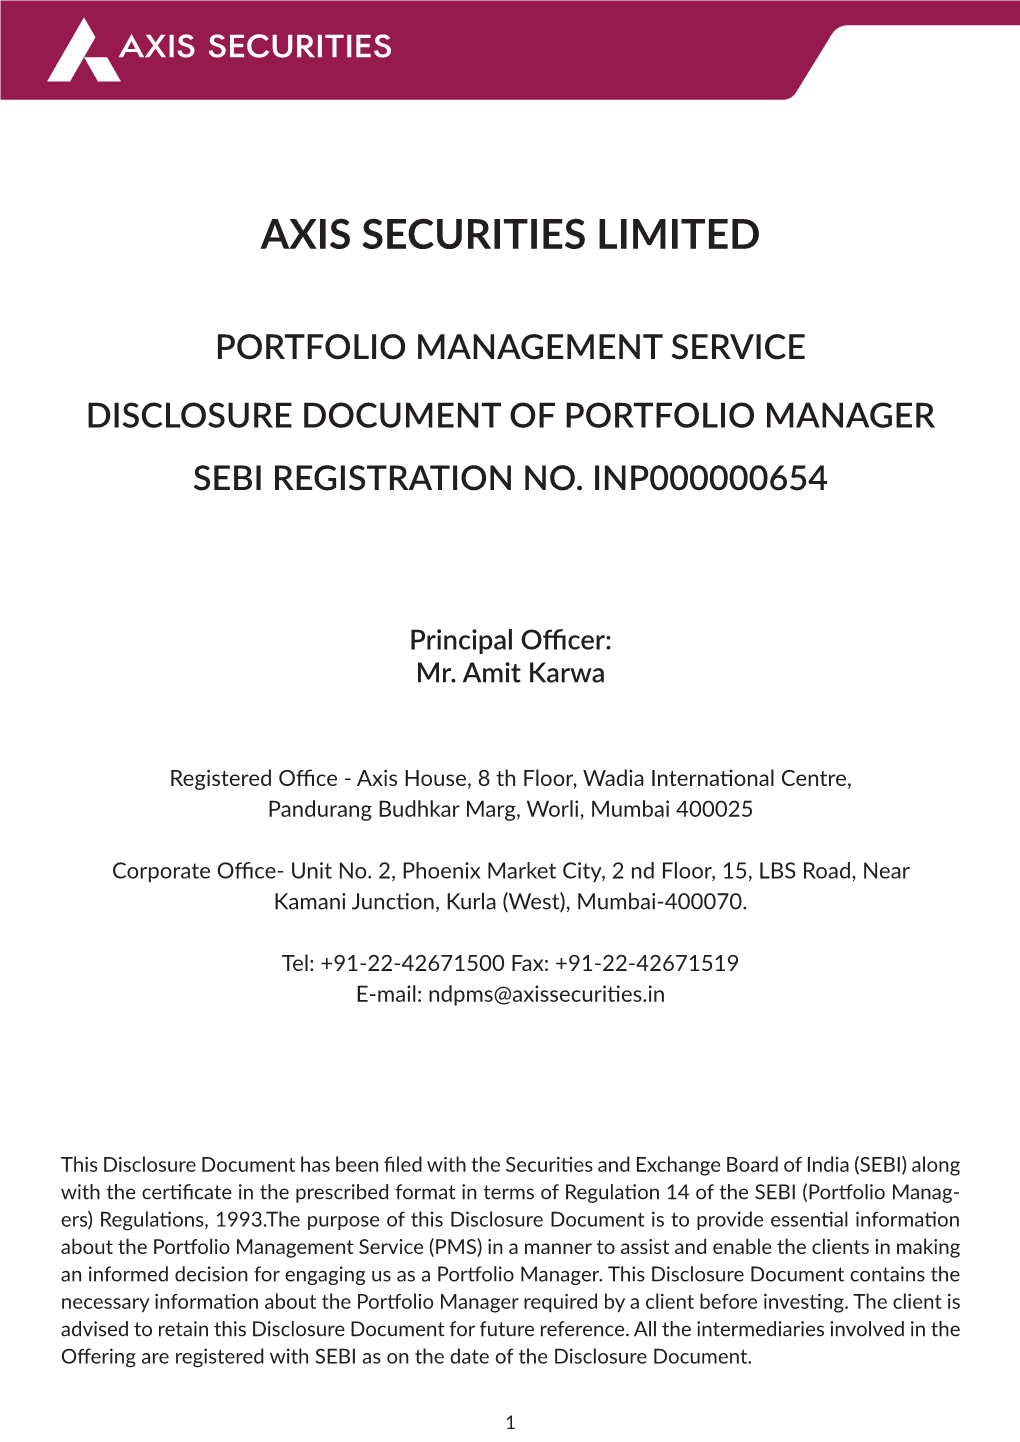 Axis Securities Limited